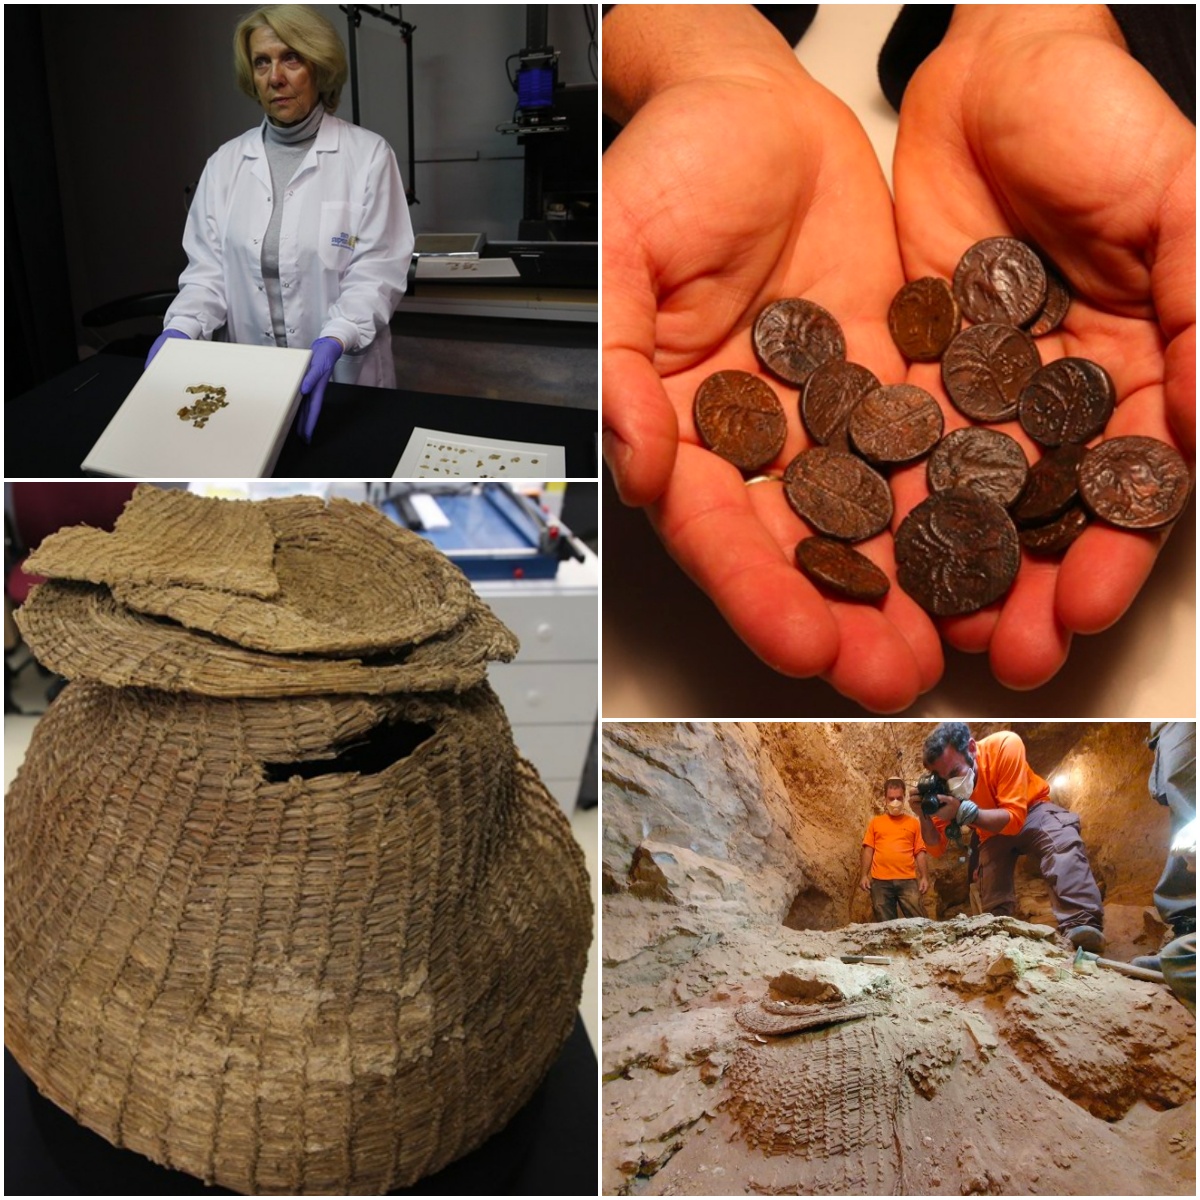 Incredible Artifacts: “The only basket worldwide 10,500 years old and a rare and intact Jewish coin from about 2,000 years ago seen in Jerusalem”